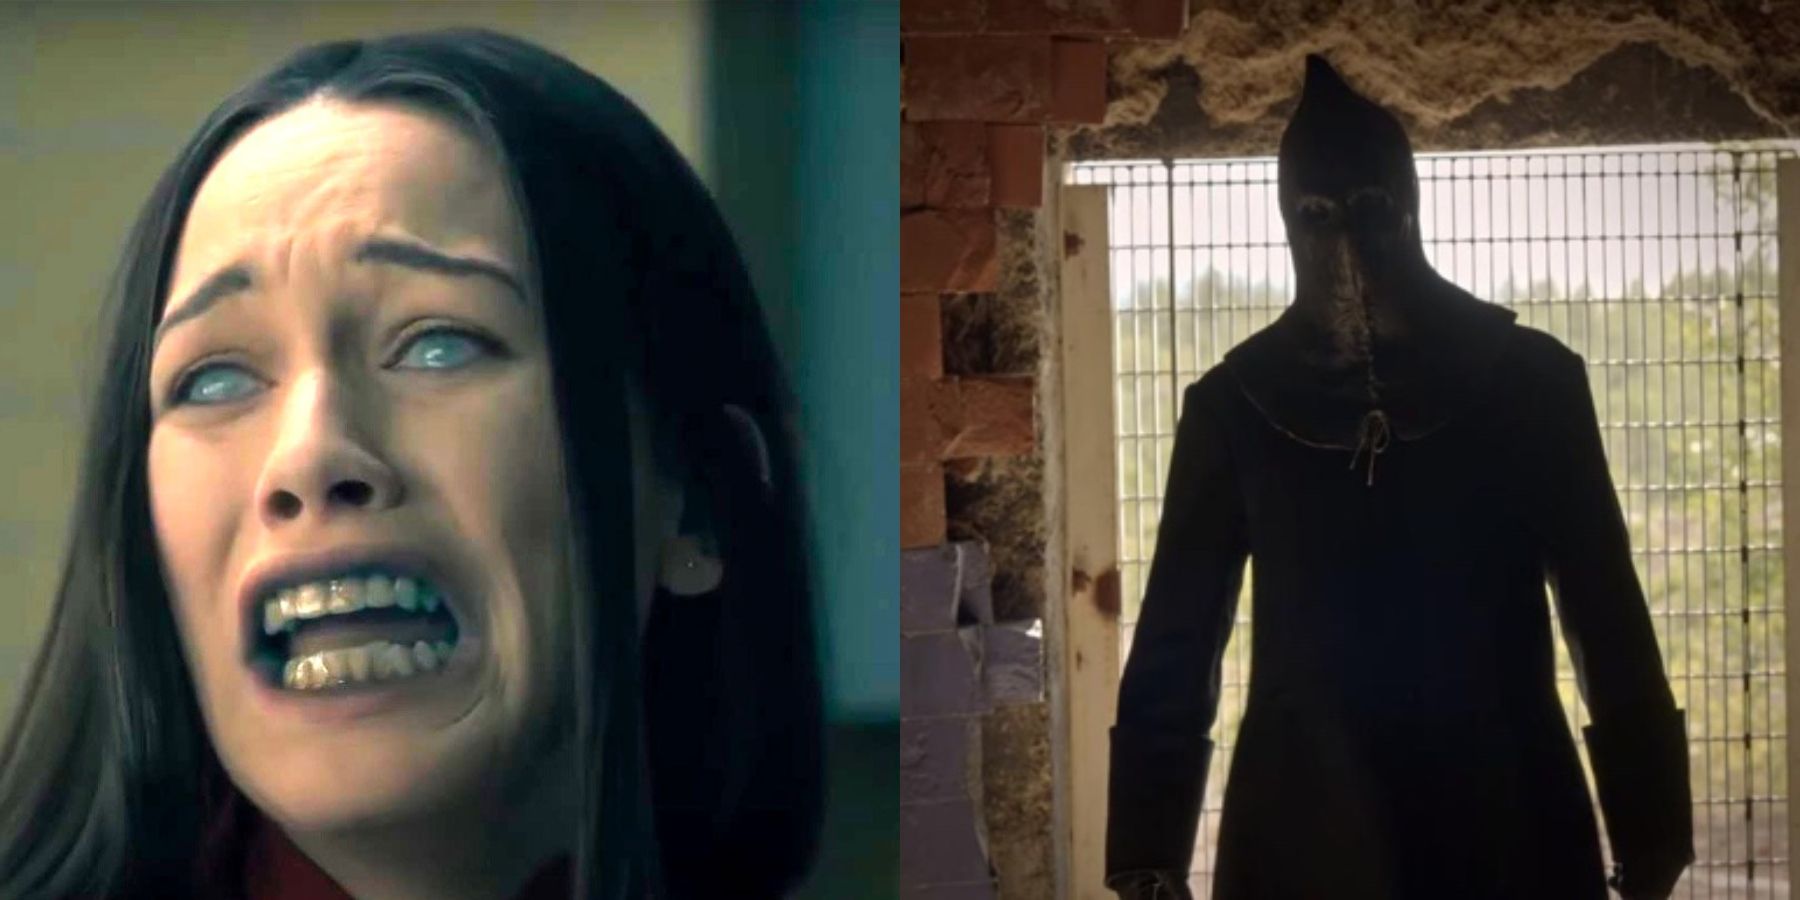 Split image of Nell Crain (Victoria Pedretti) in The Haunting Of Hill House and The Executioner killer in Slasher season 1